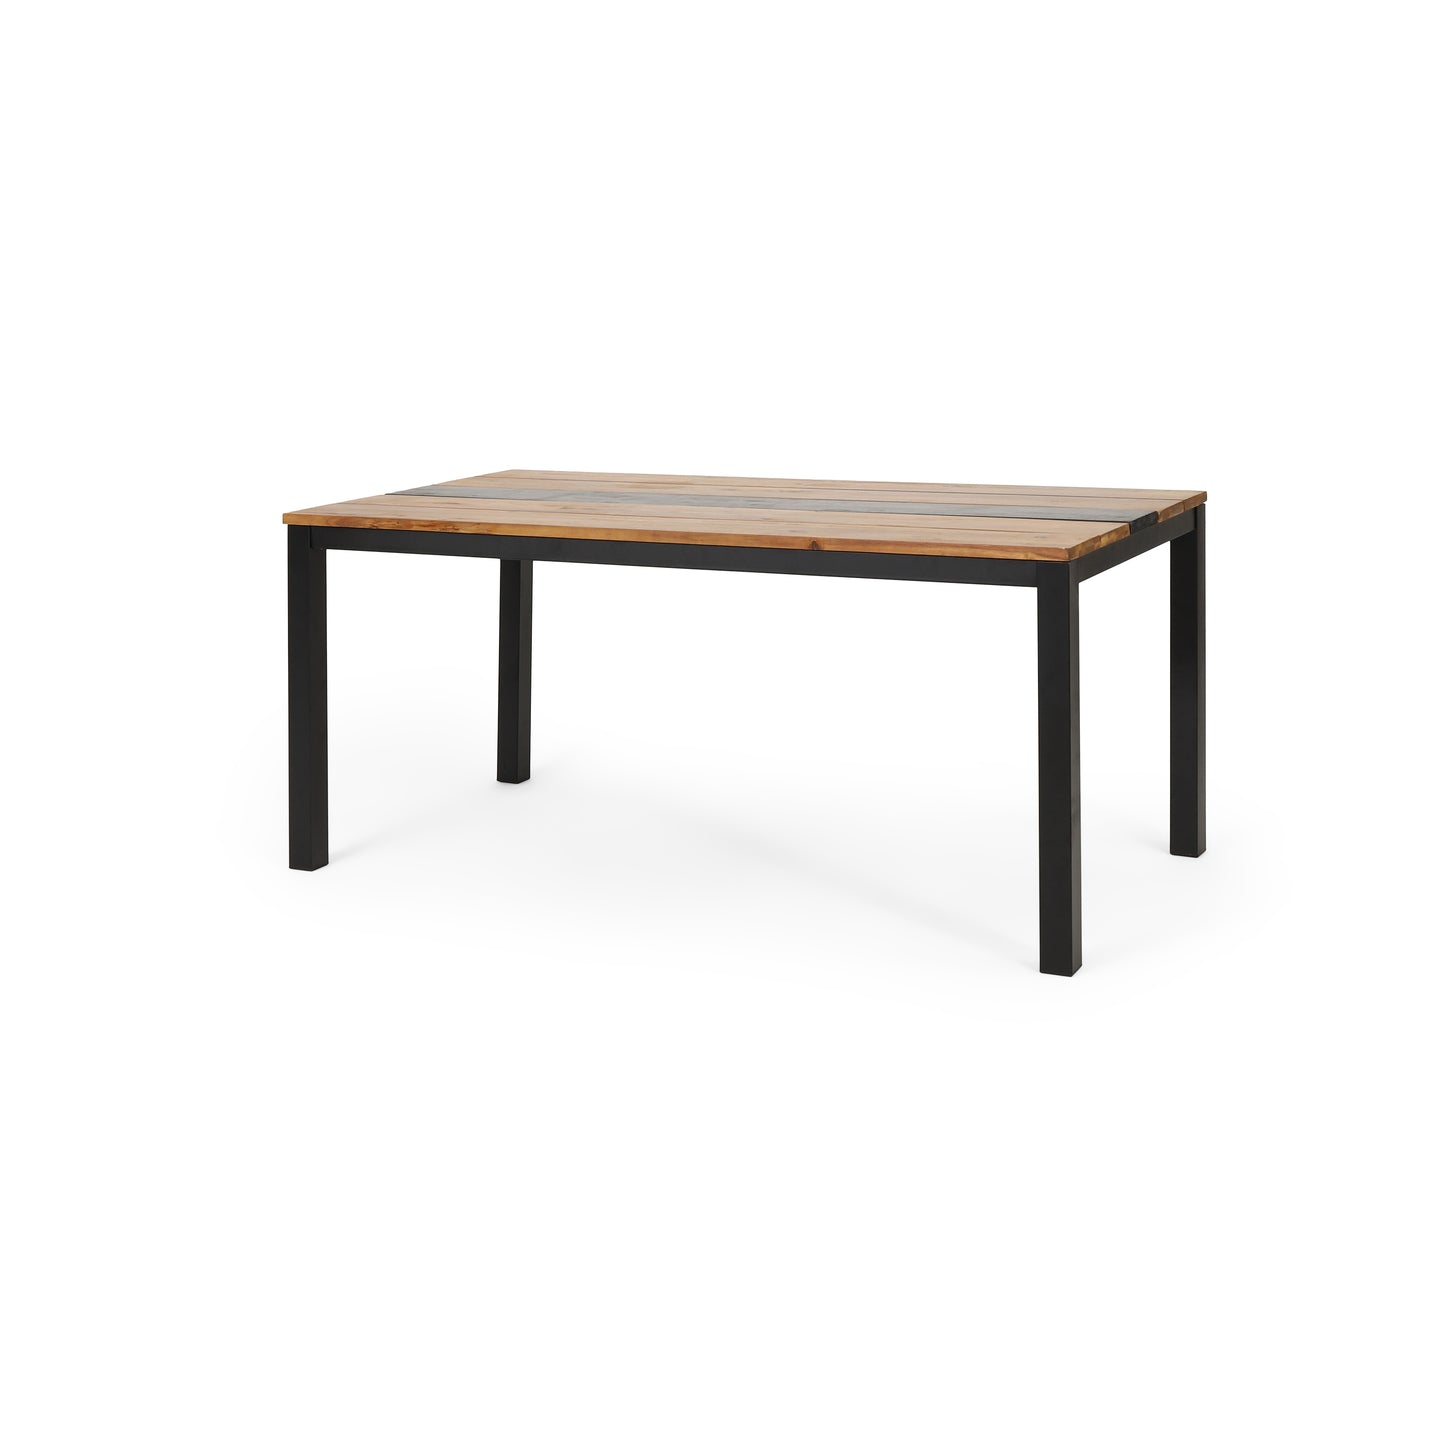 Colcord Outdoor Modern Industrial Acacia Wood Dining Table, Teak and Black